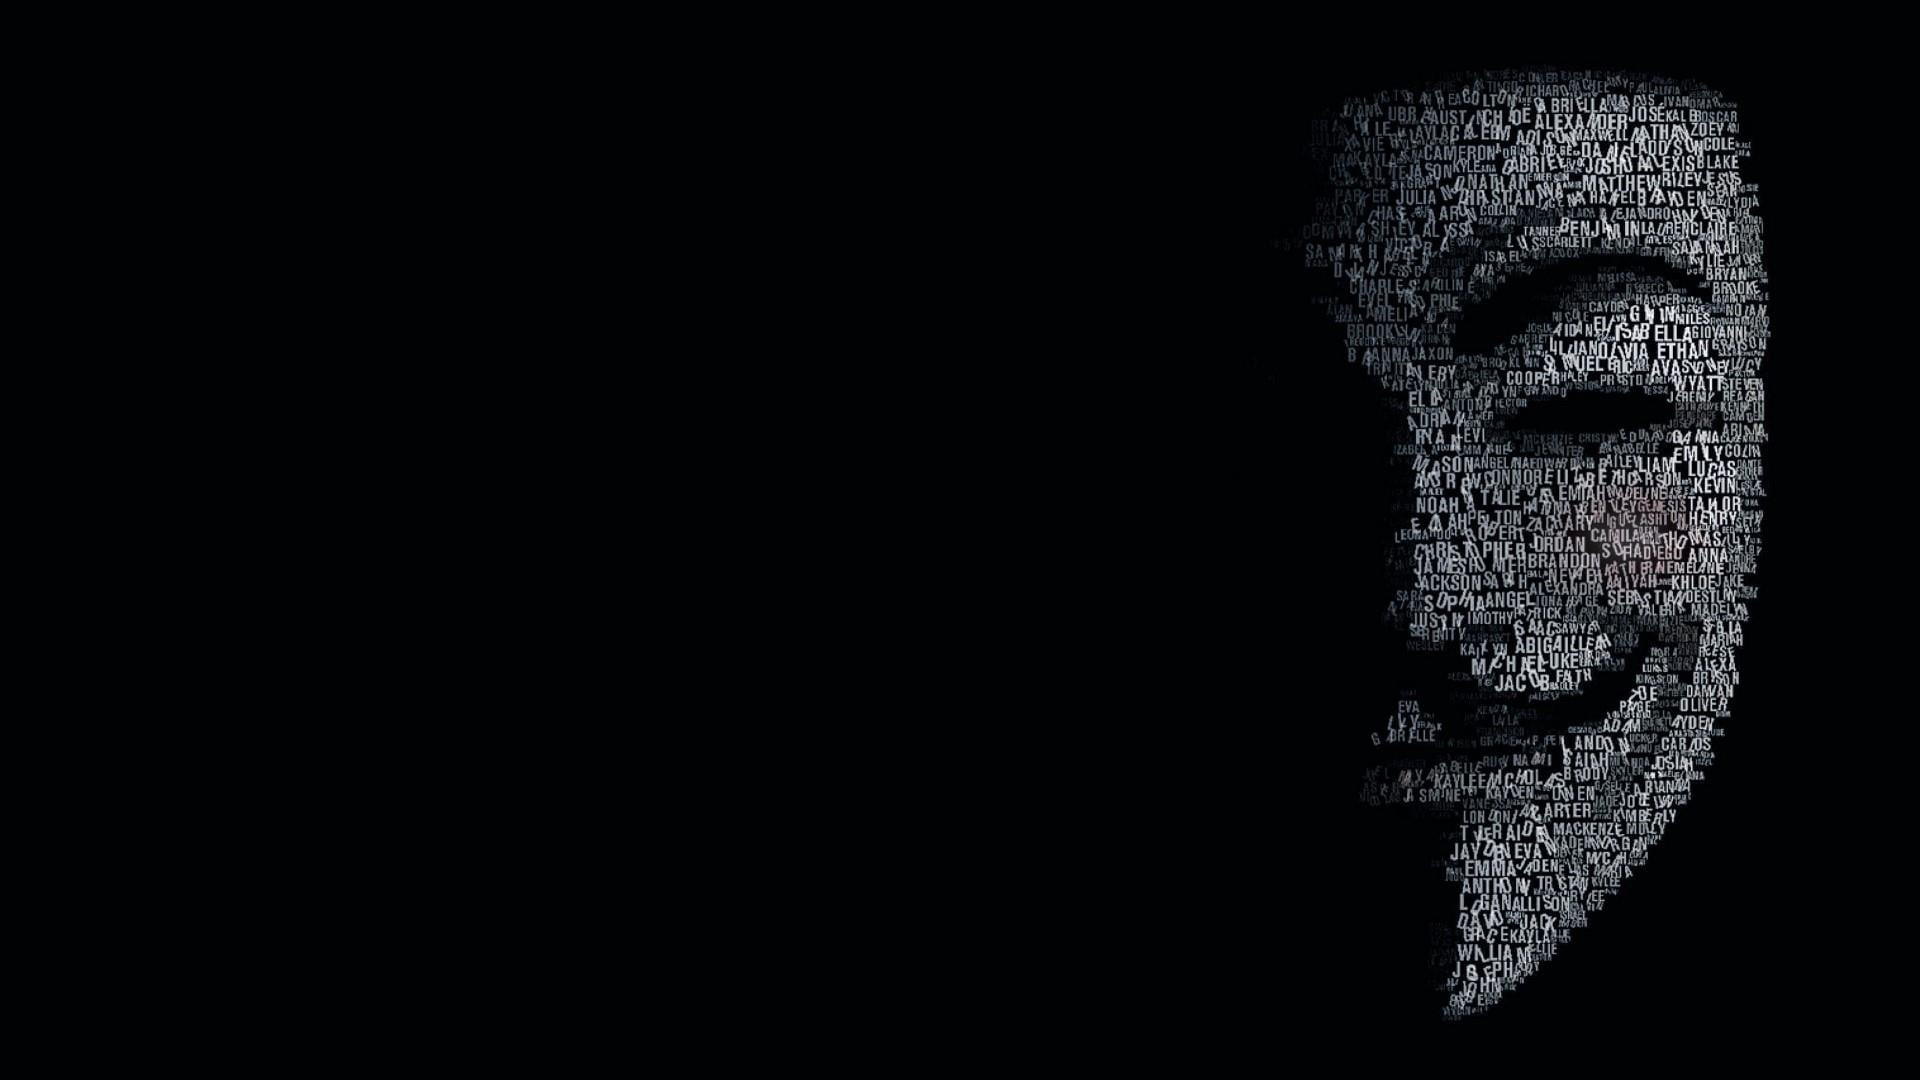 Wallpaper black, black and white, anonymous, hackers, darkness, monochrome